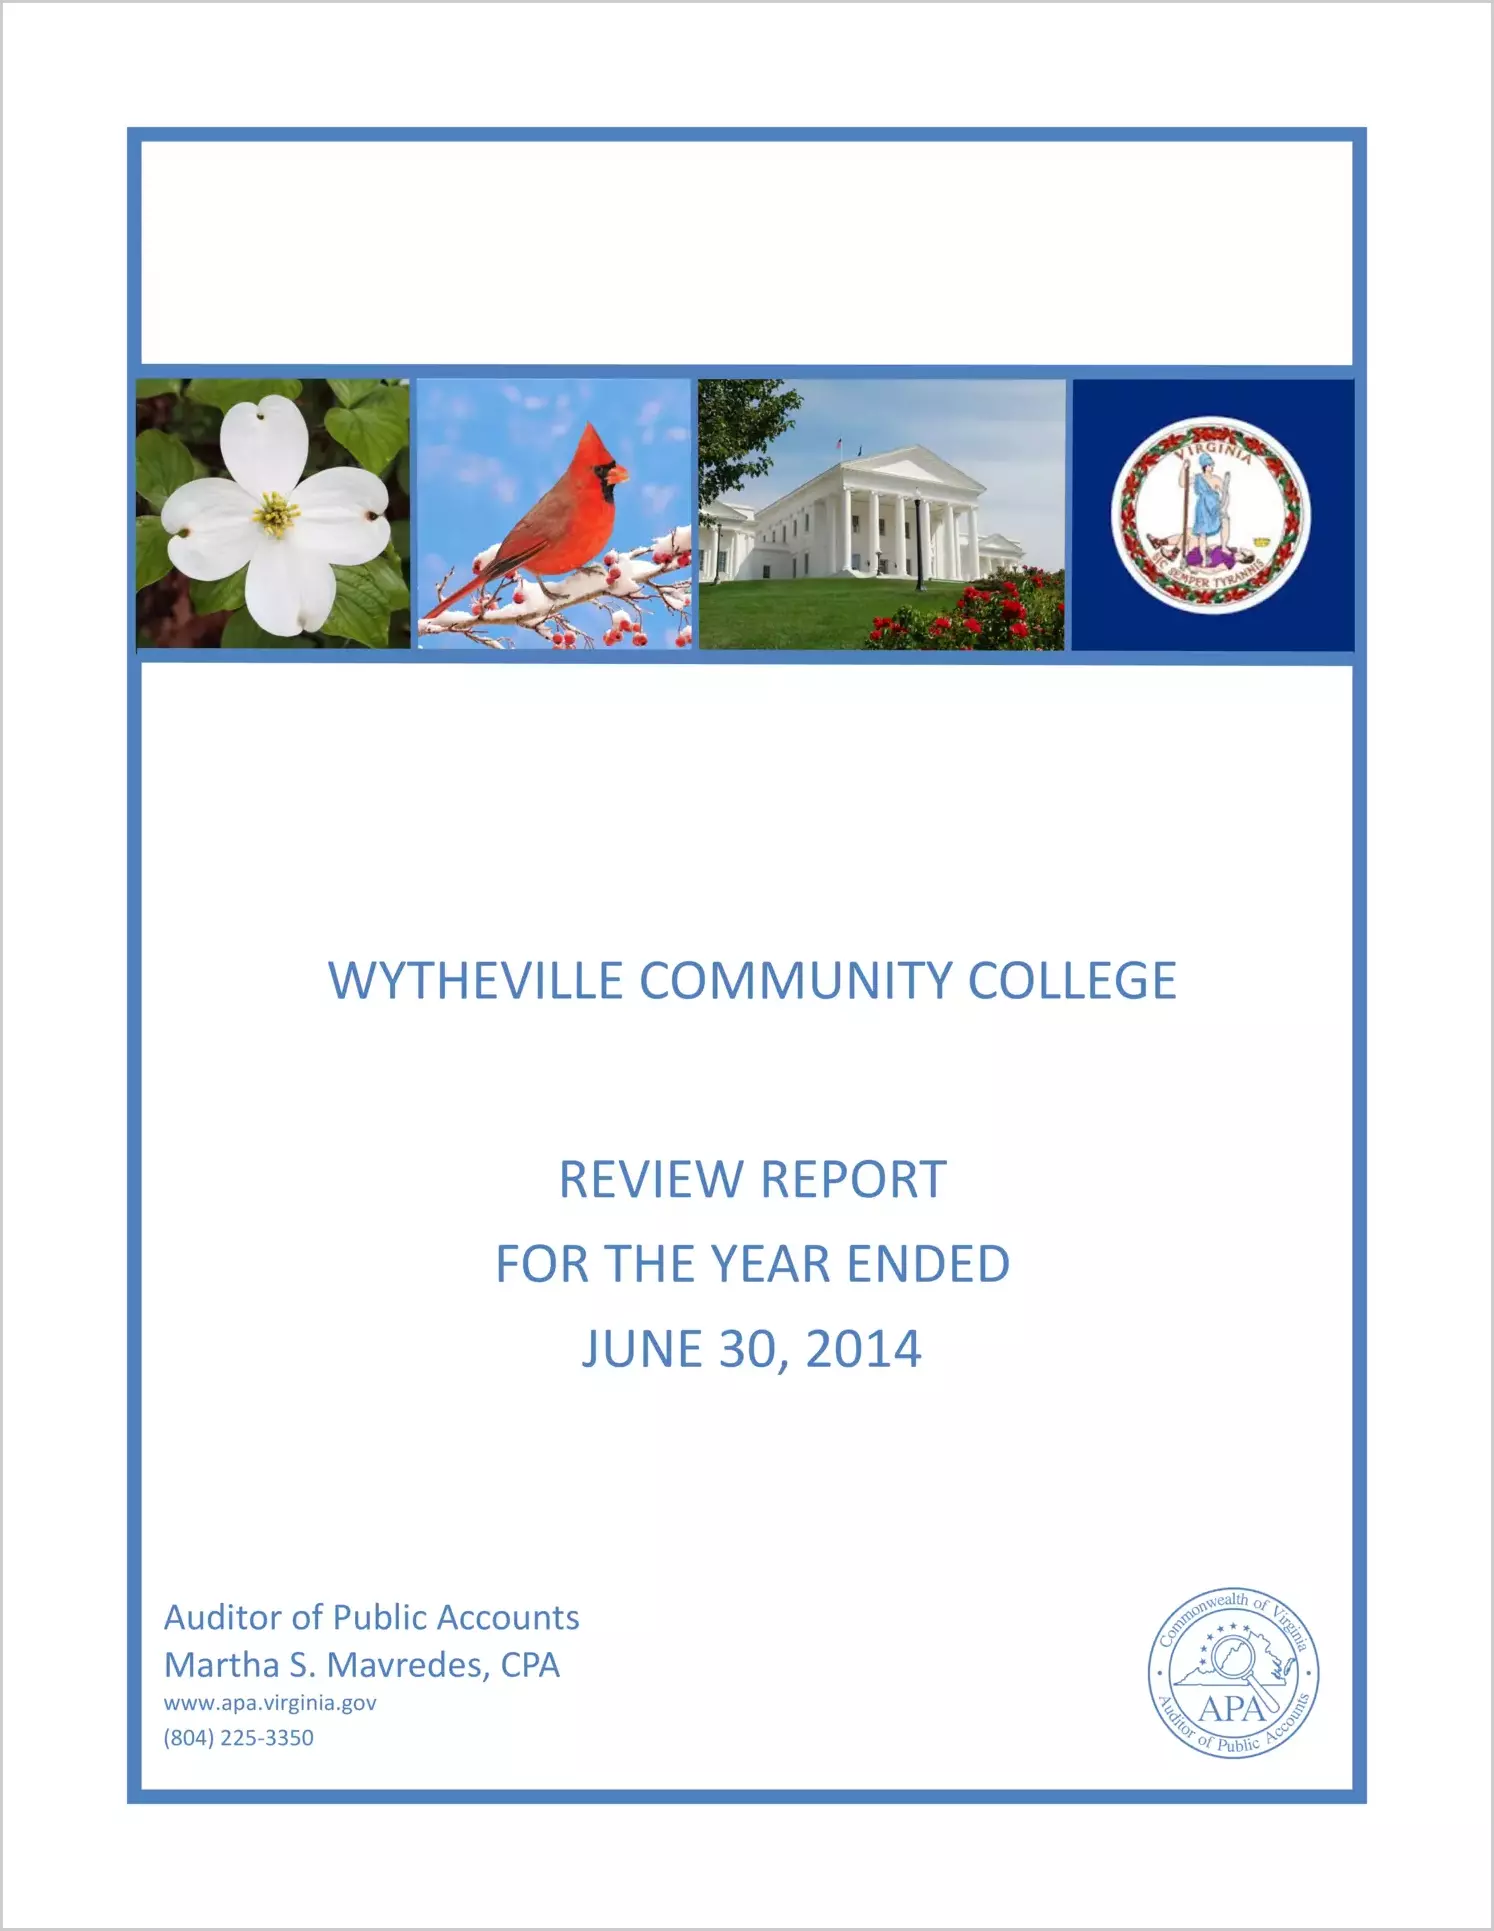 Wytheville Community College for the year ended June 30, 2014